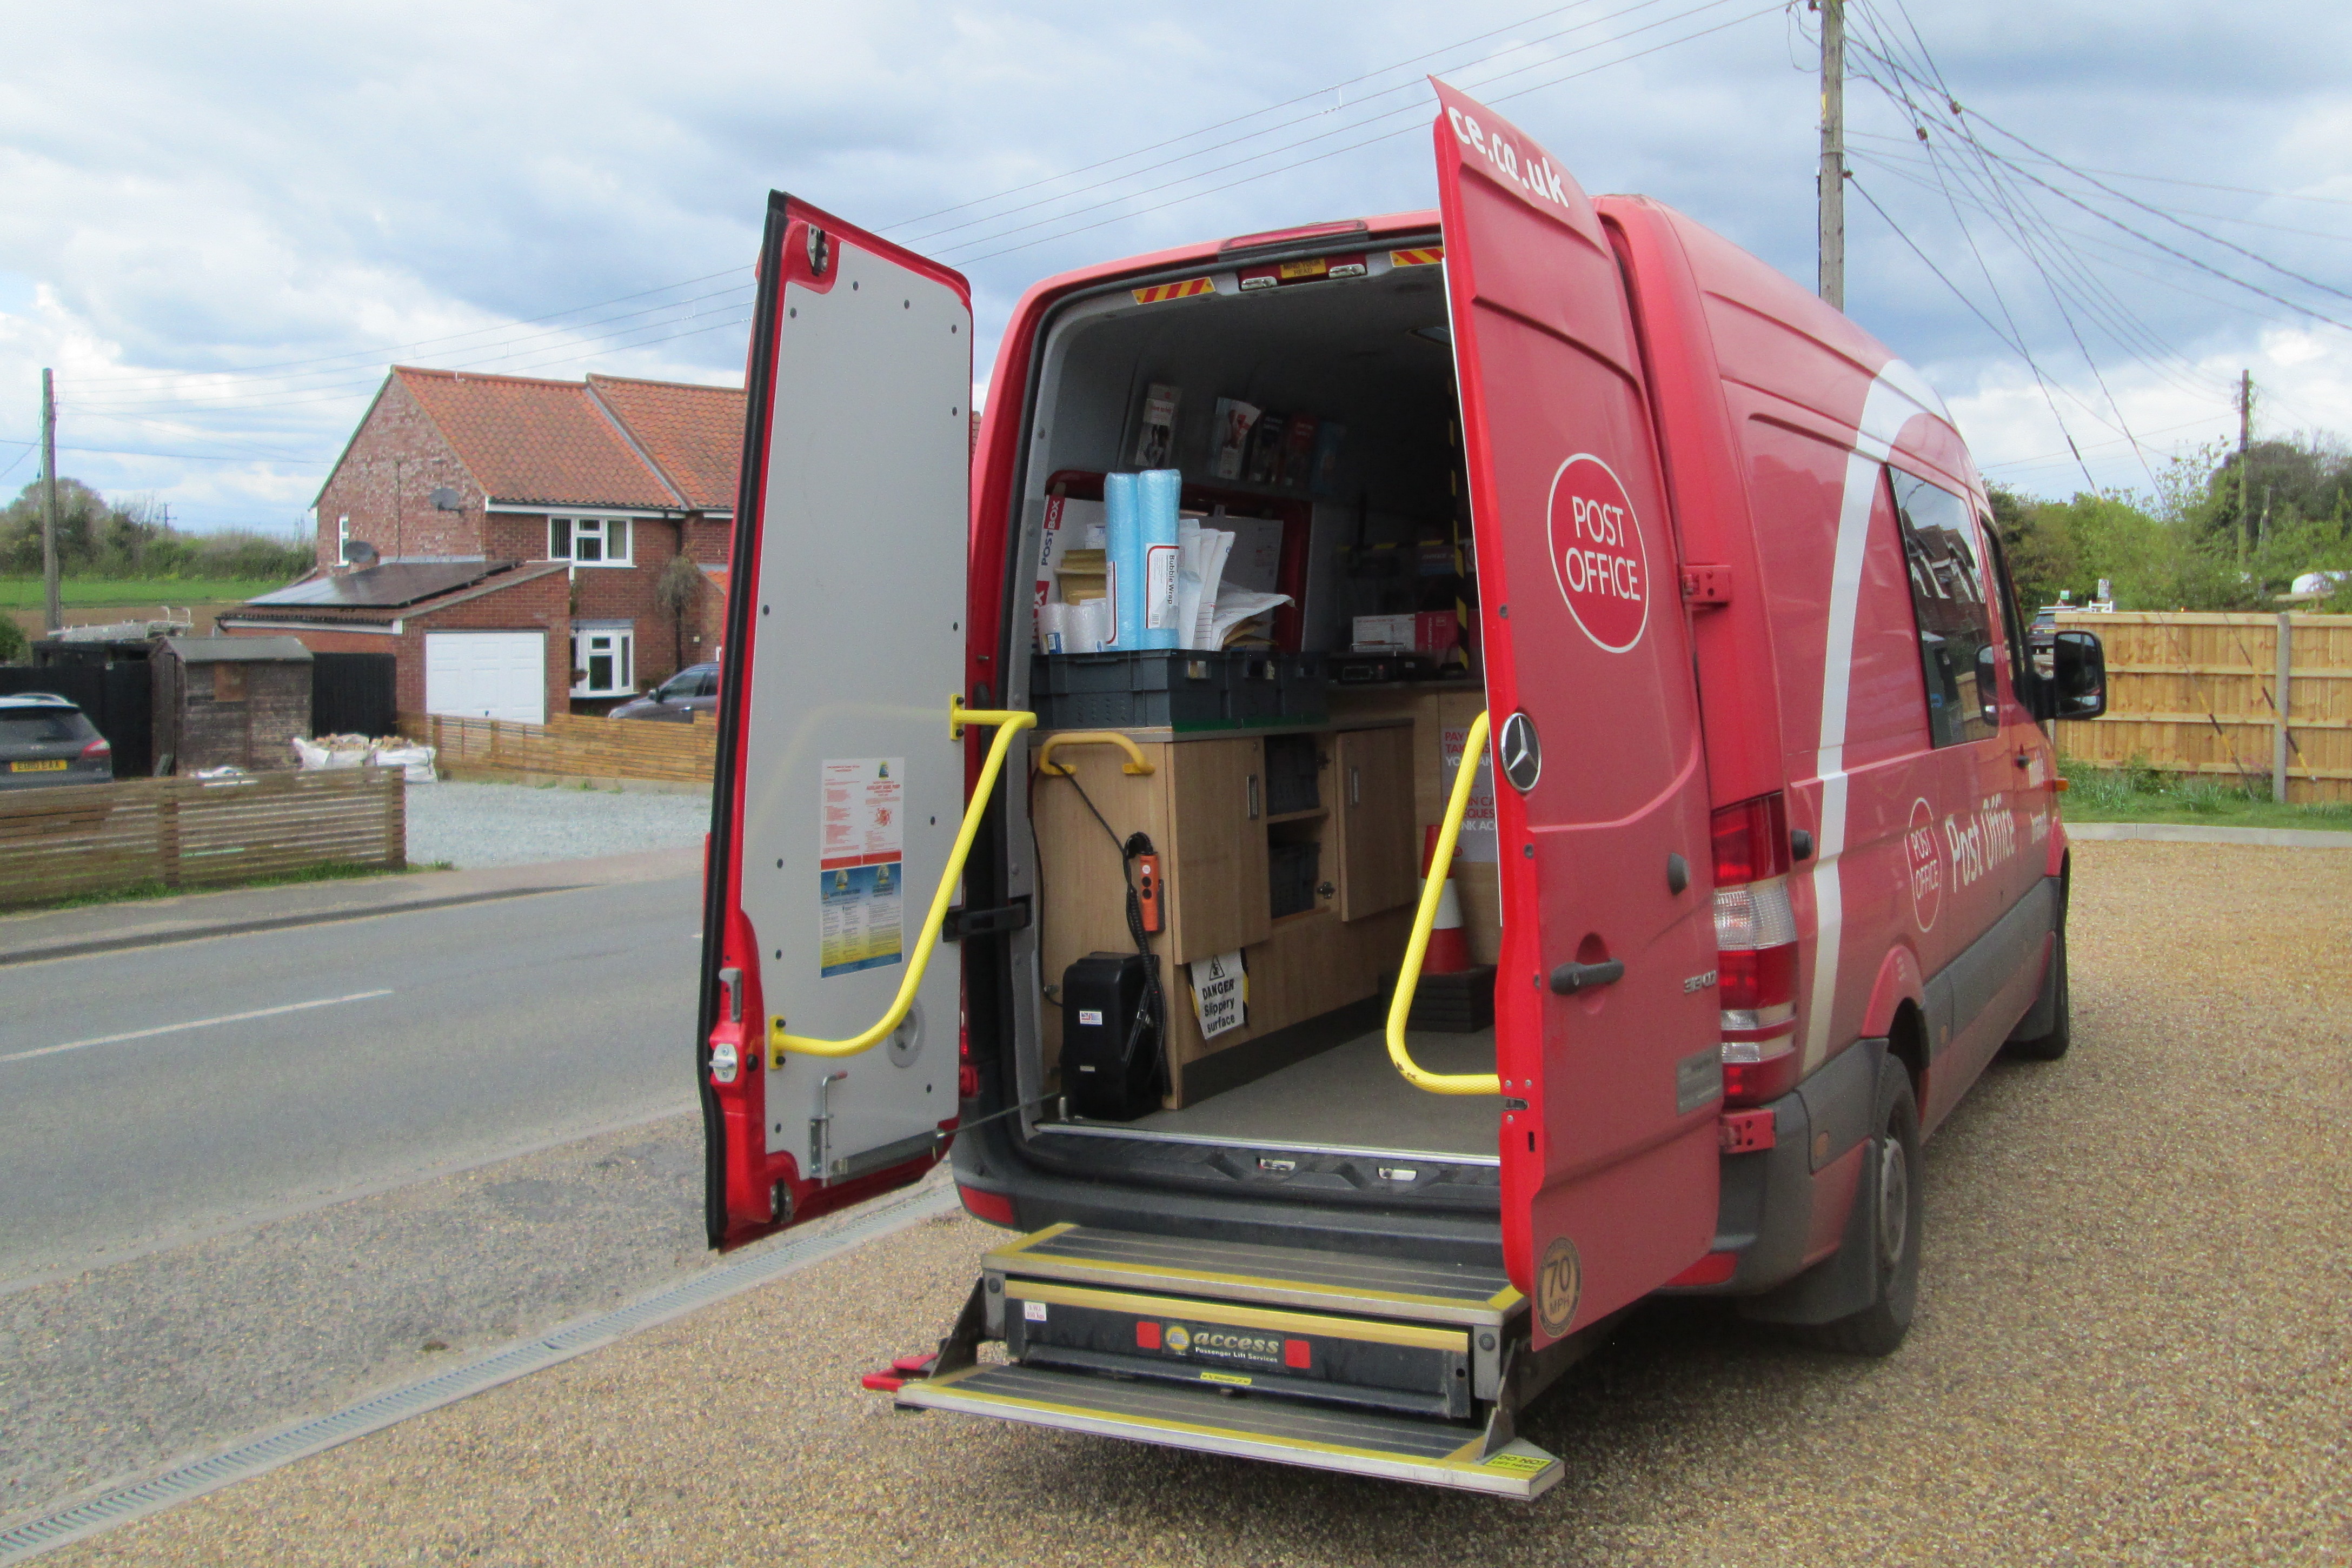 The new mobile post office